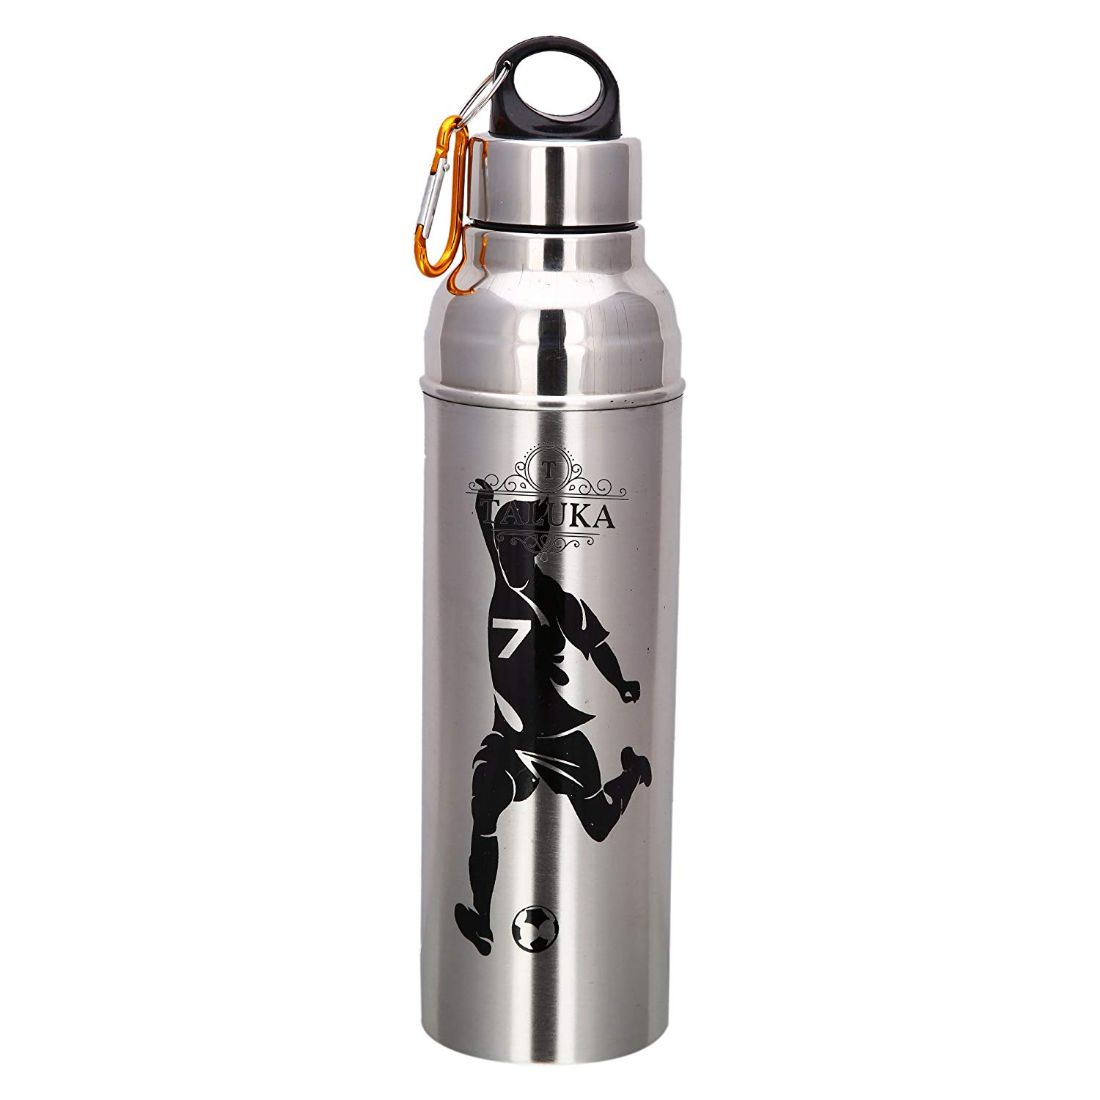 Set OF 3 Stainless Steel Insulated Hot & Cold water Bottles Sports Bottle Sipper Drink ware (500 Ml, 750 ML, 1000 ML)